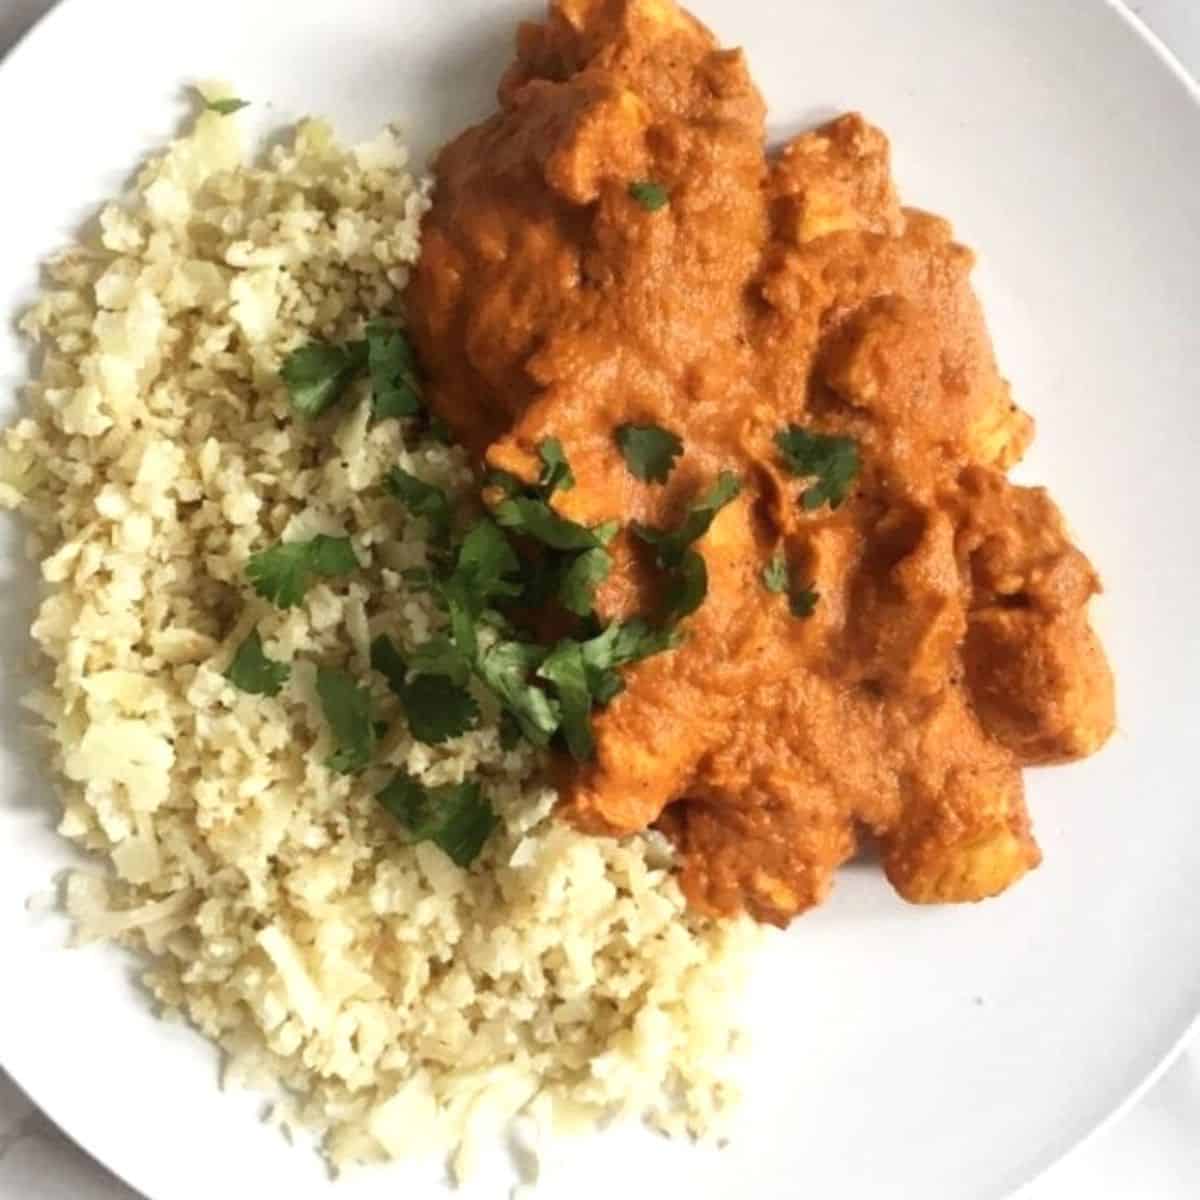 How to Make Keto Friendly Banging Butter Chicken